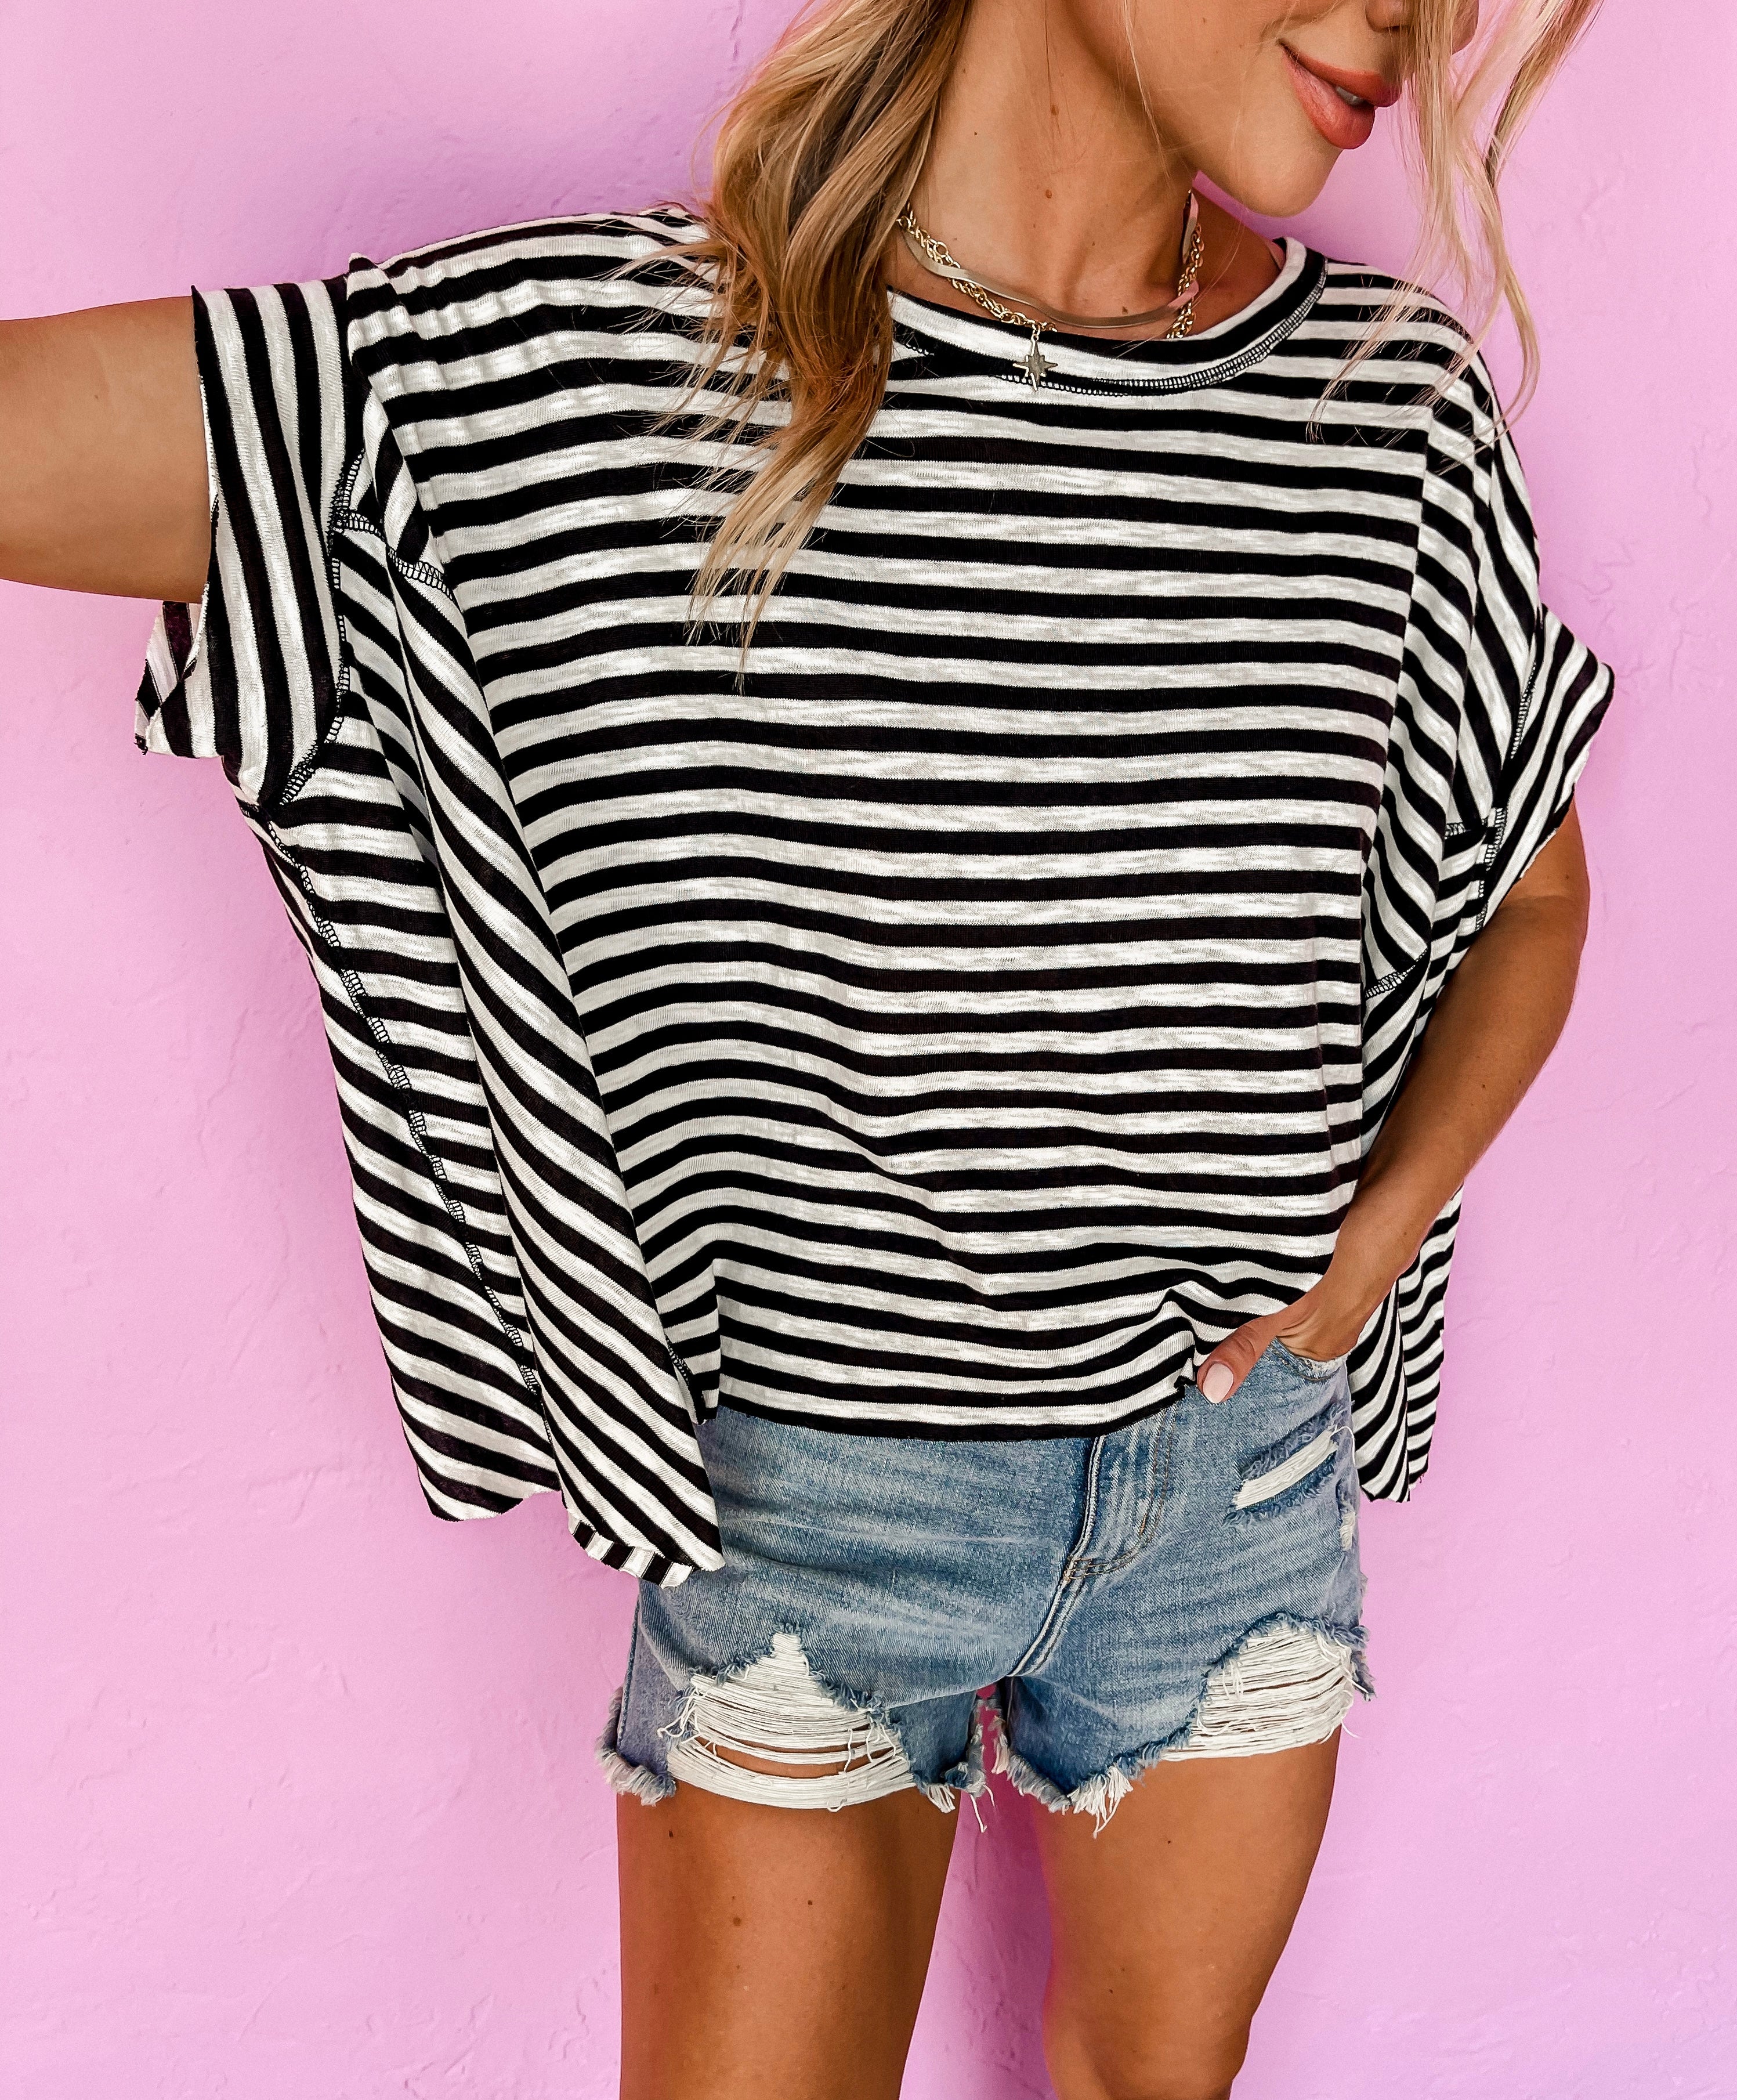 Take Care Oversized Striped Top